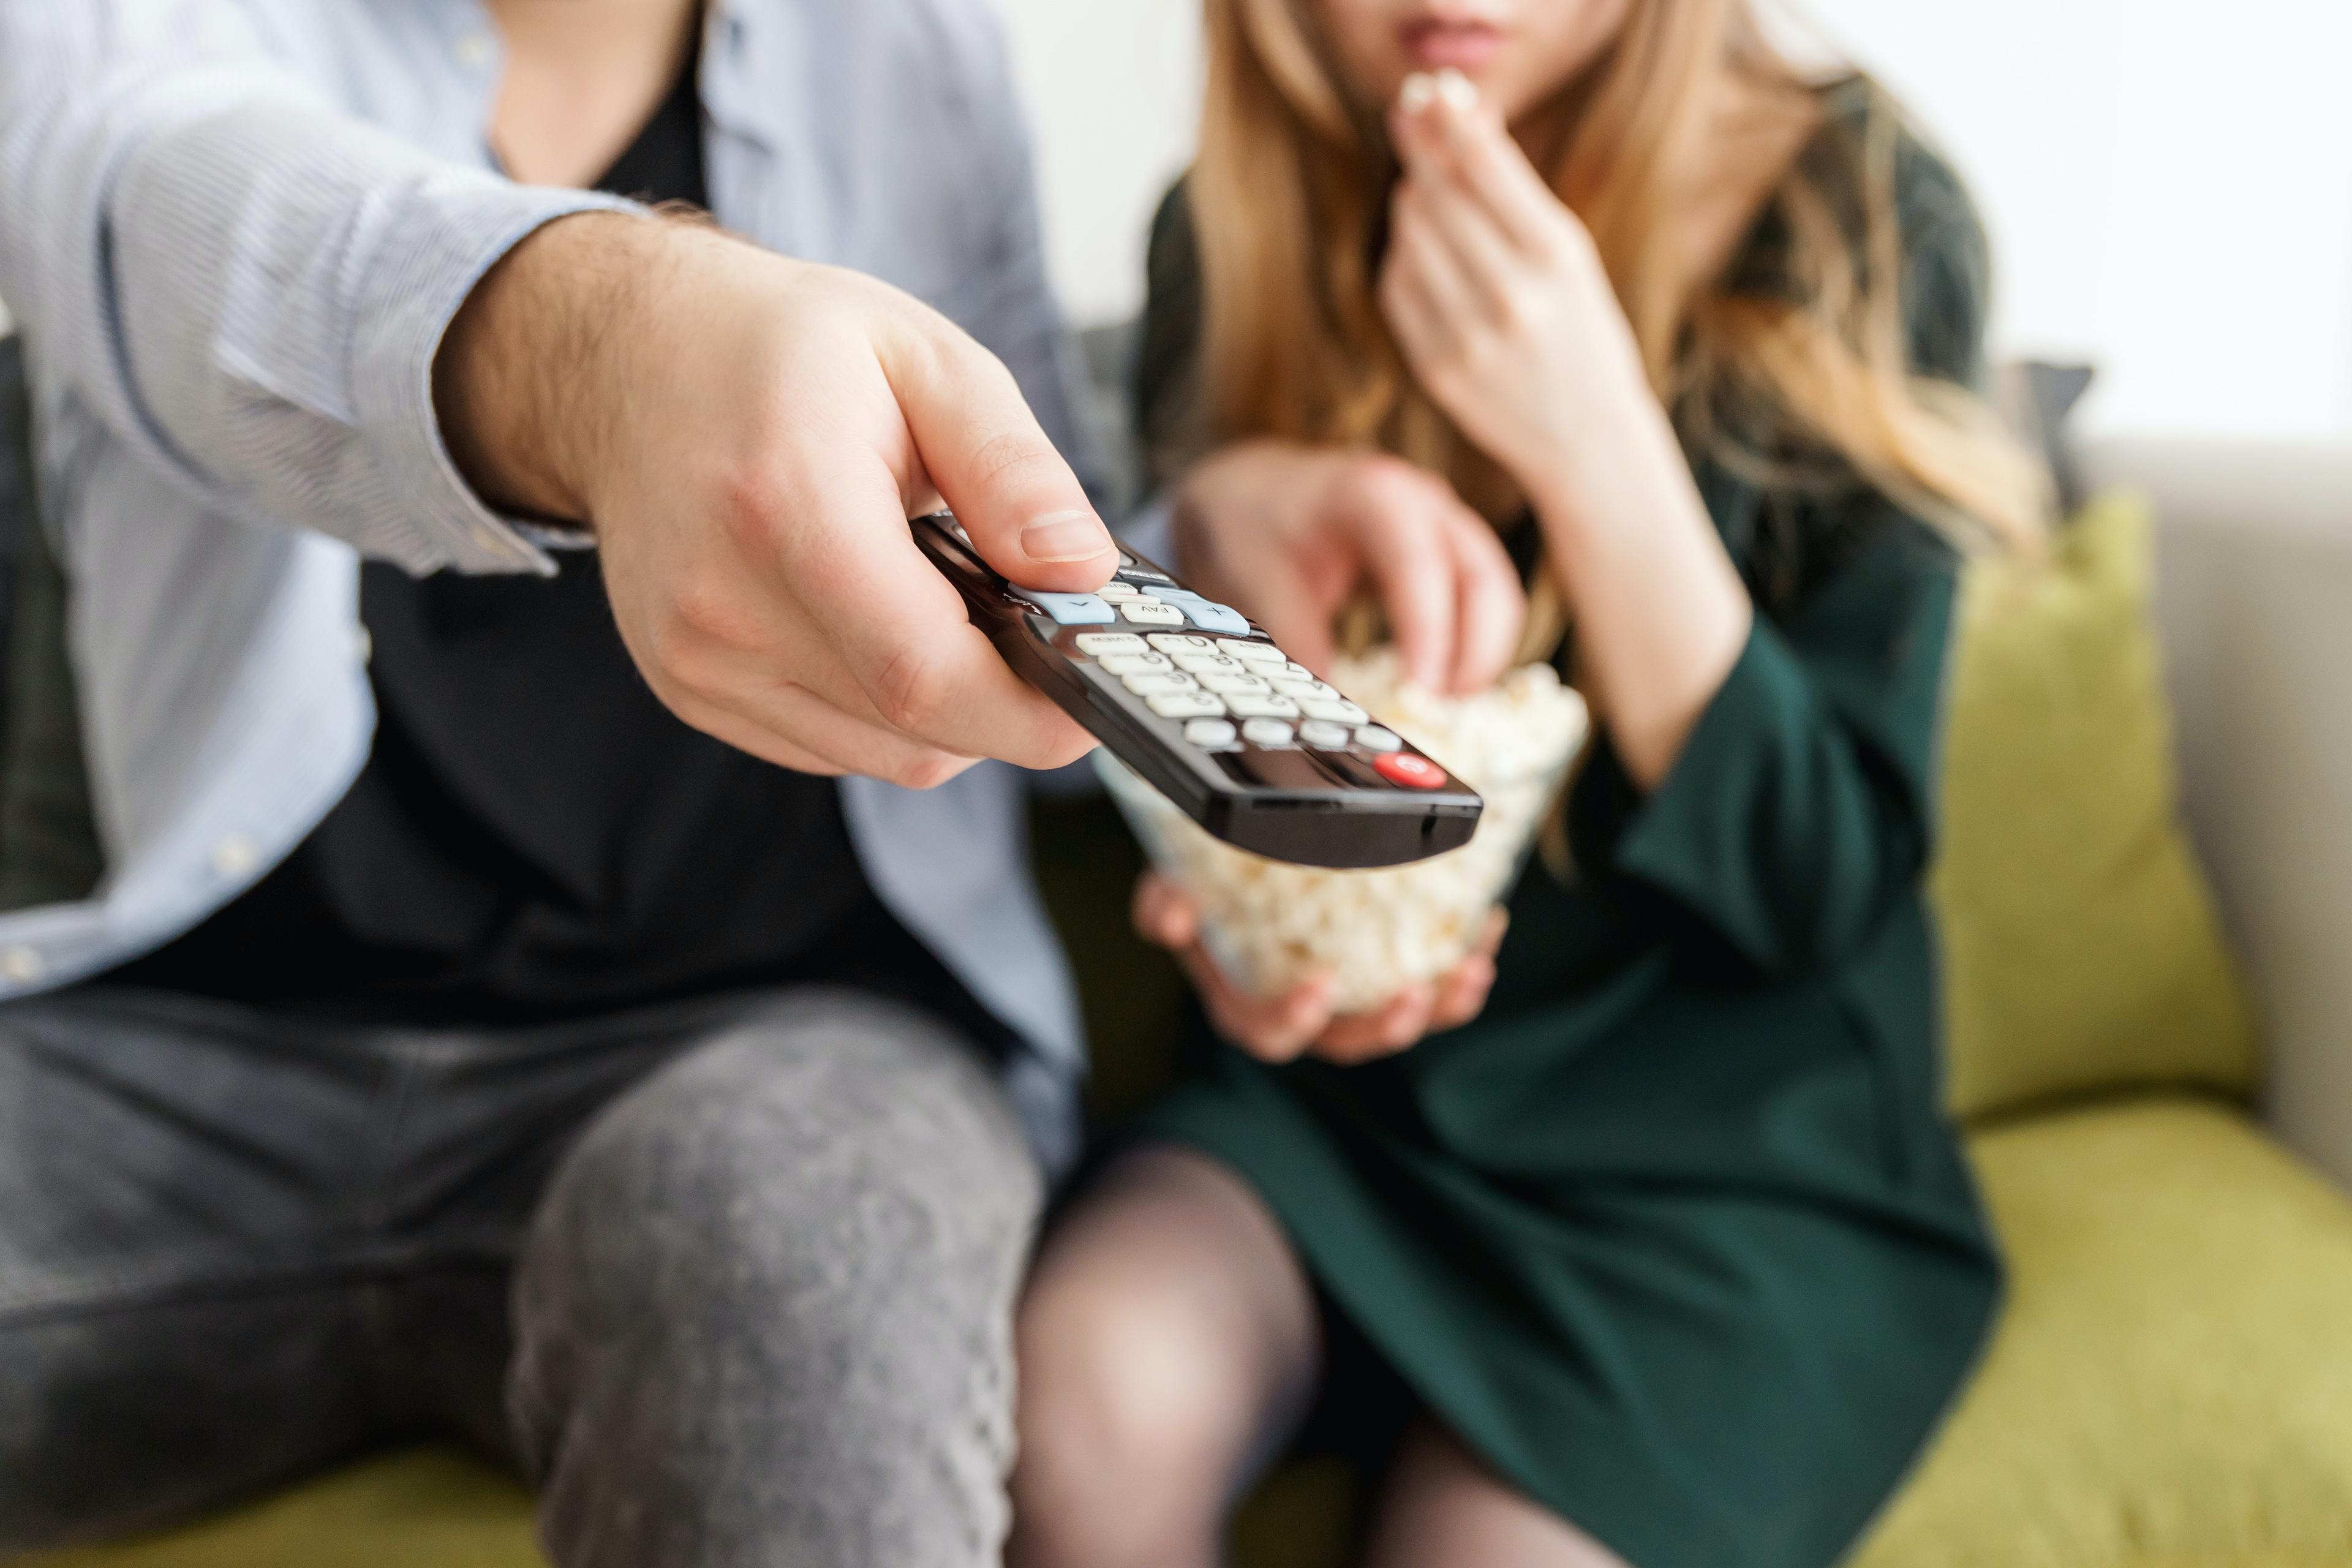 Couple watching TV on sofa in living room while having a snack